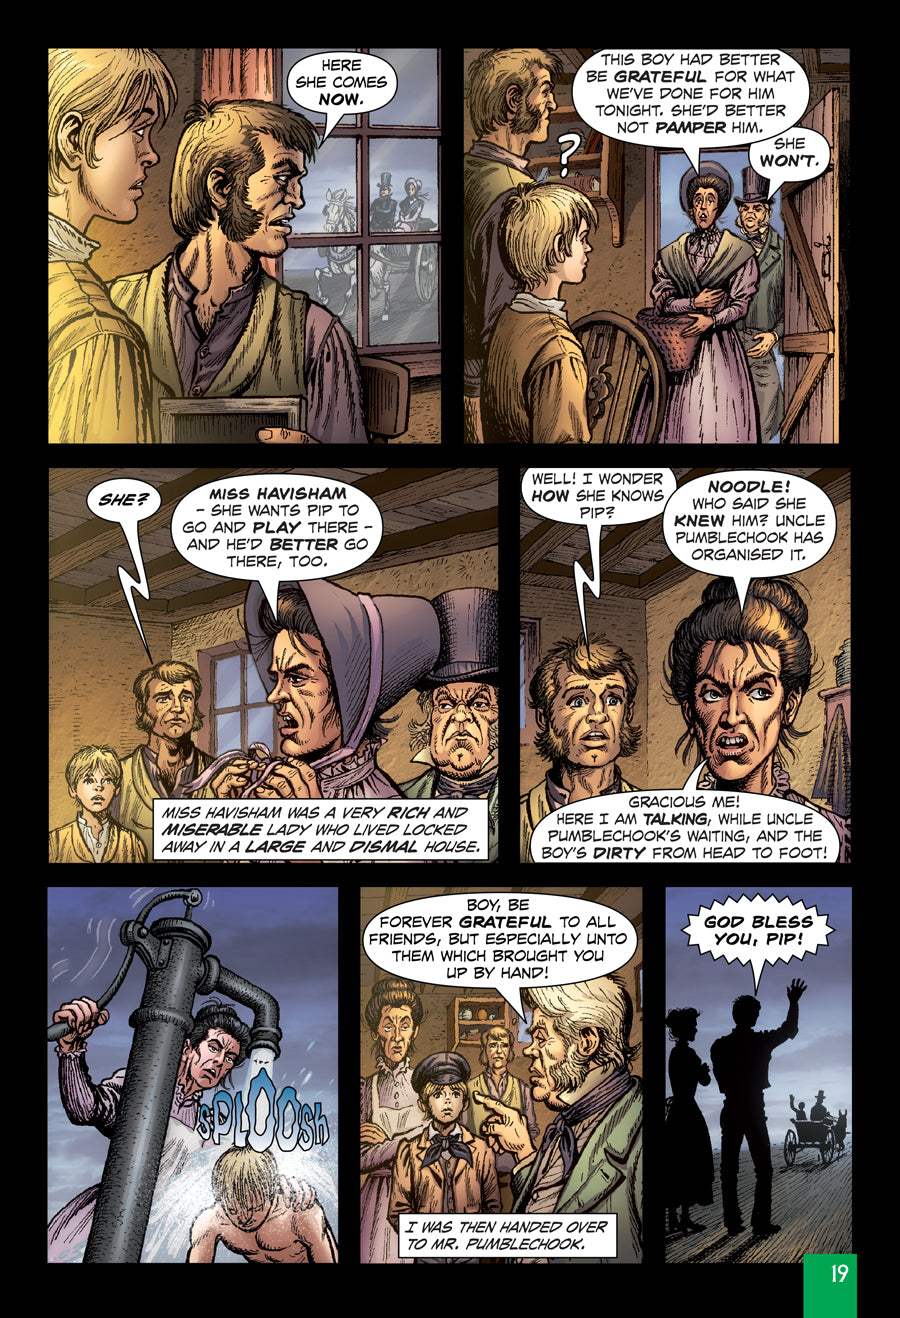 A sample Quick Text interior page from Great Expectations.